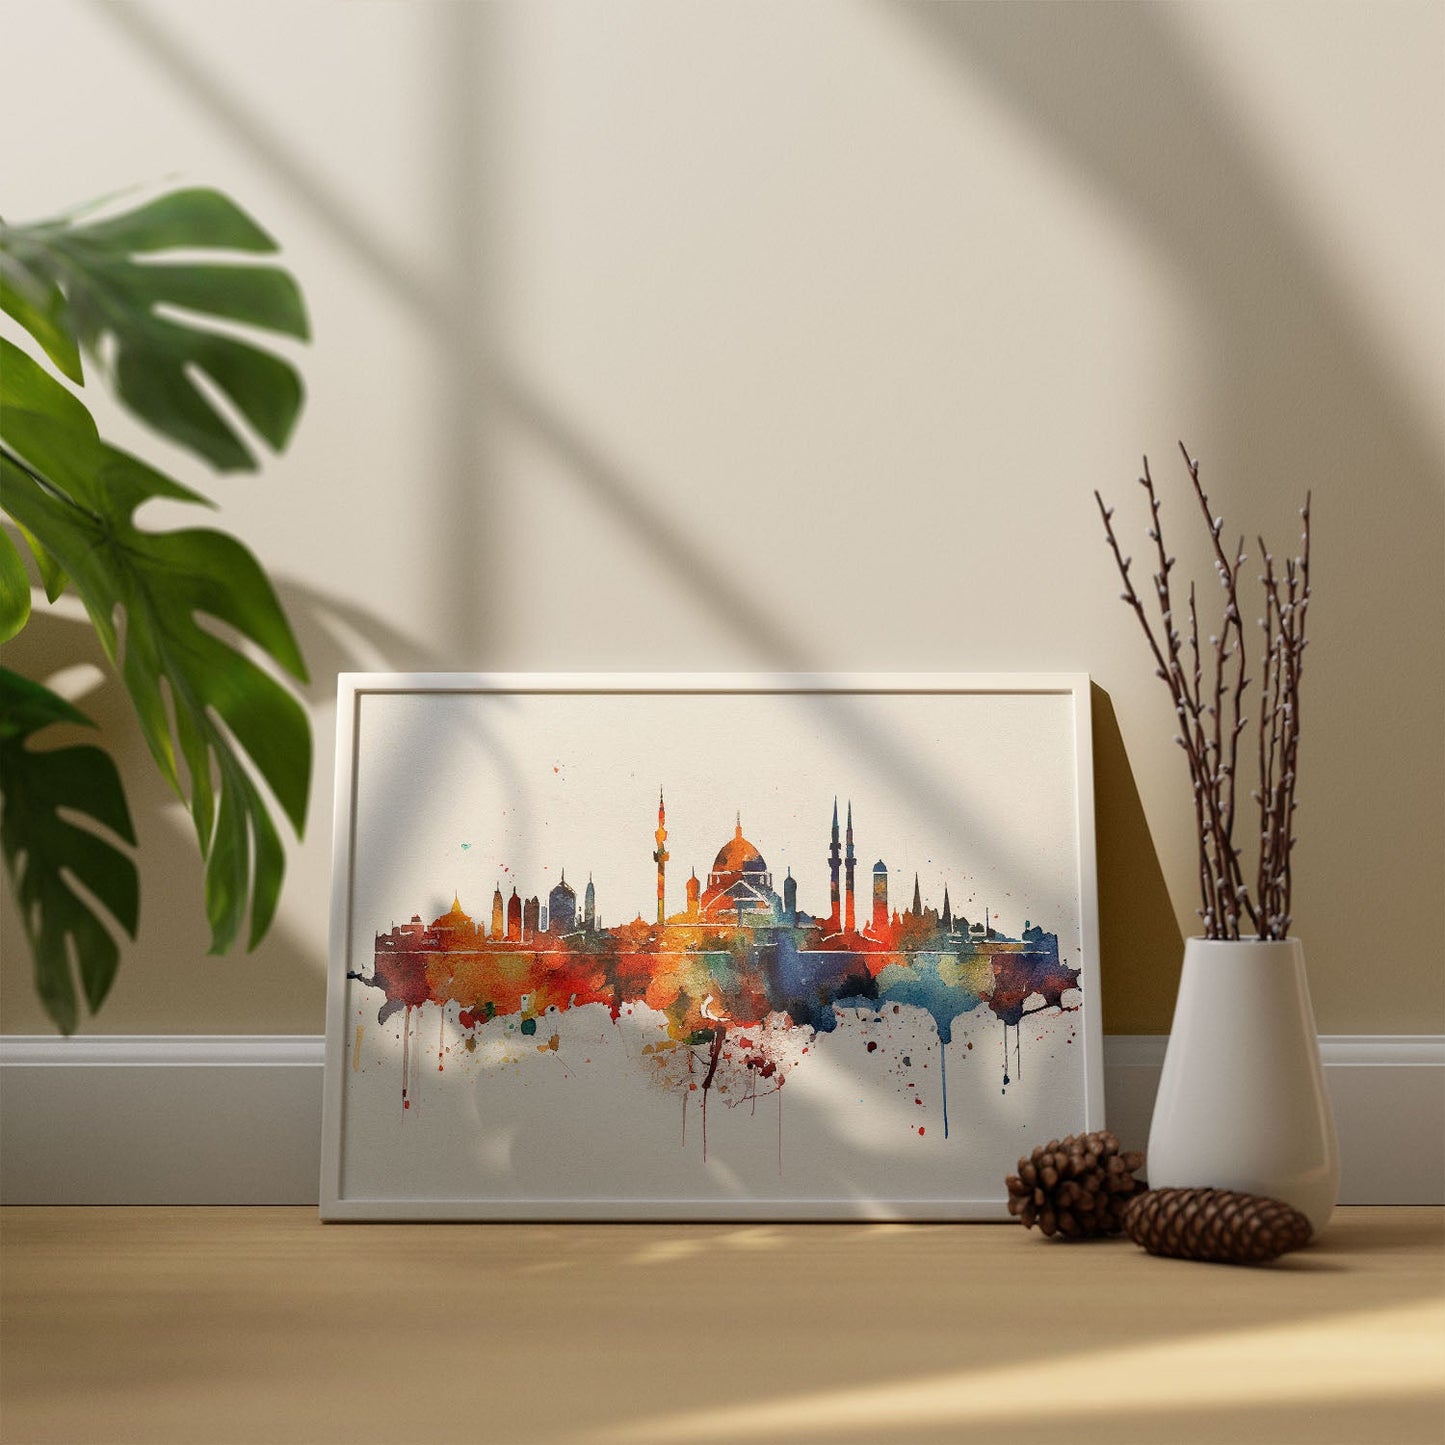 Nacnic watercolor of a skyline of the city of Istanbul_3. Aesthetic Wall Art Prints for Bedroom or Living Room Design.-Artwork-Nacnic-A4-Sin Marco-Nacnic Estudio SL